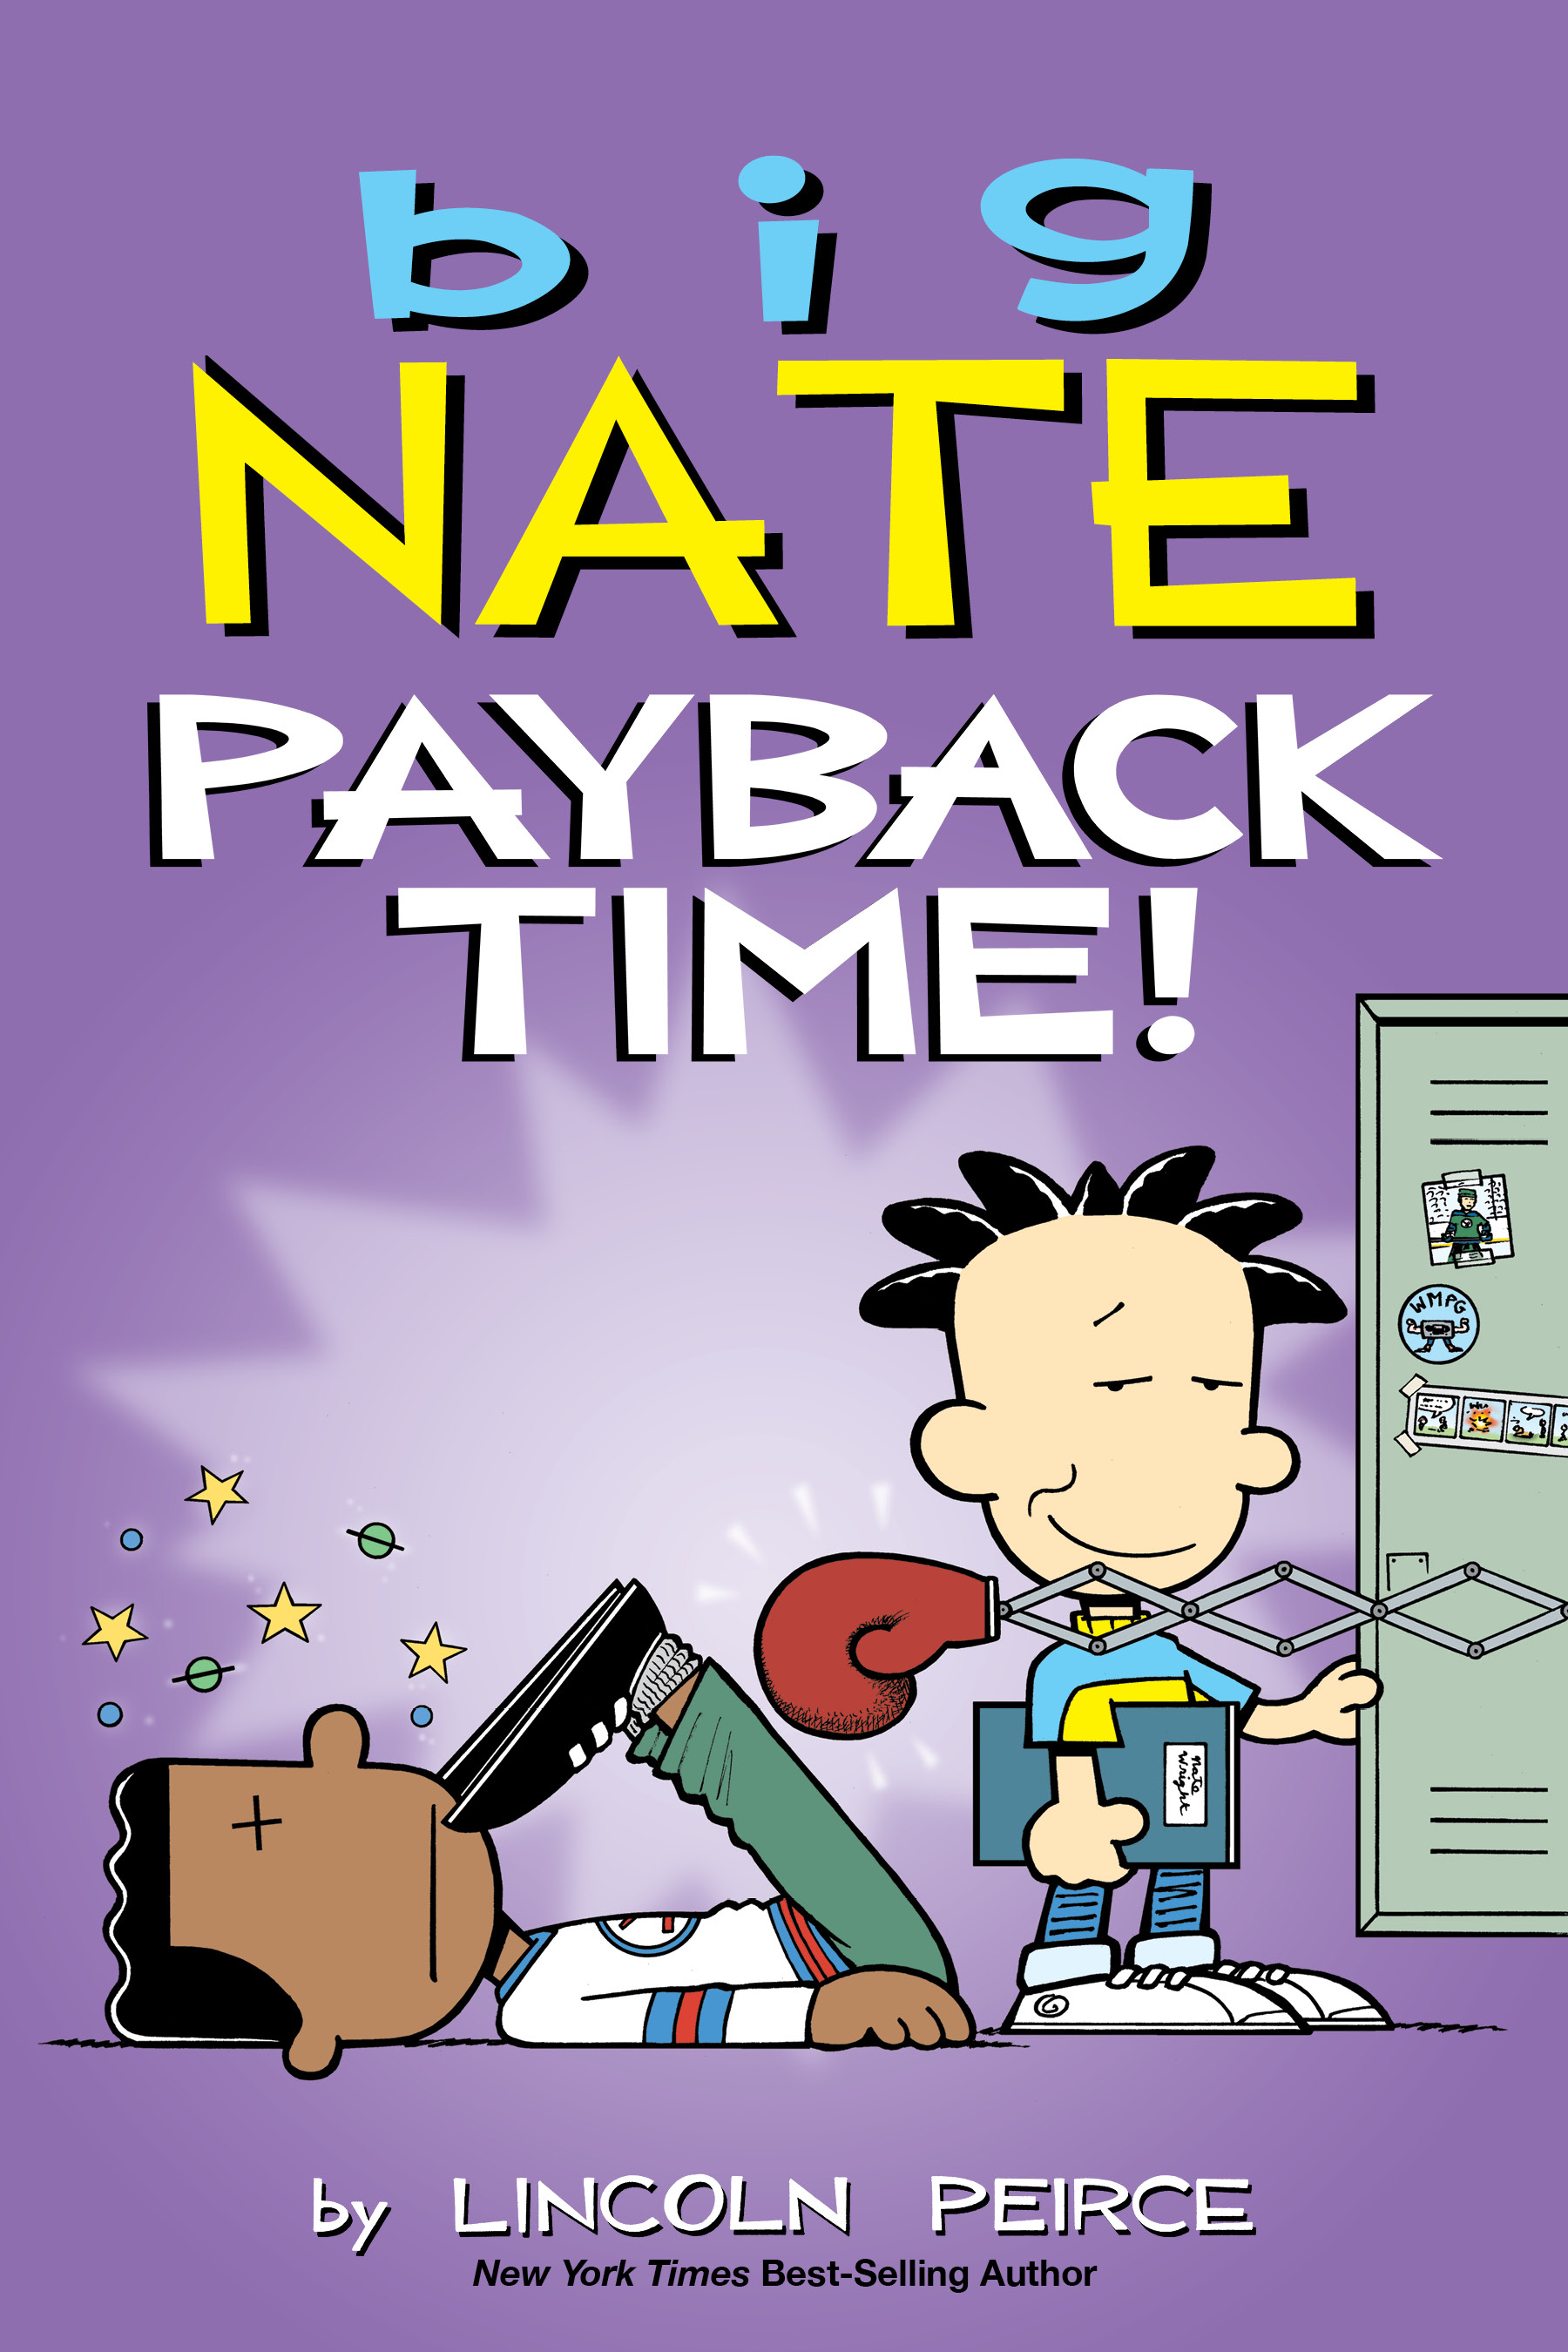 Big Nate payback time cover image